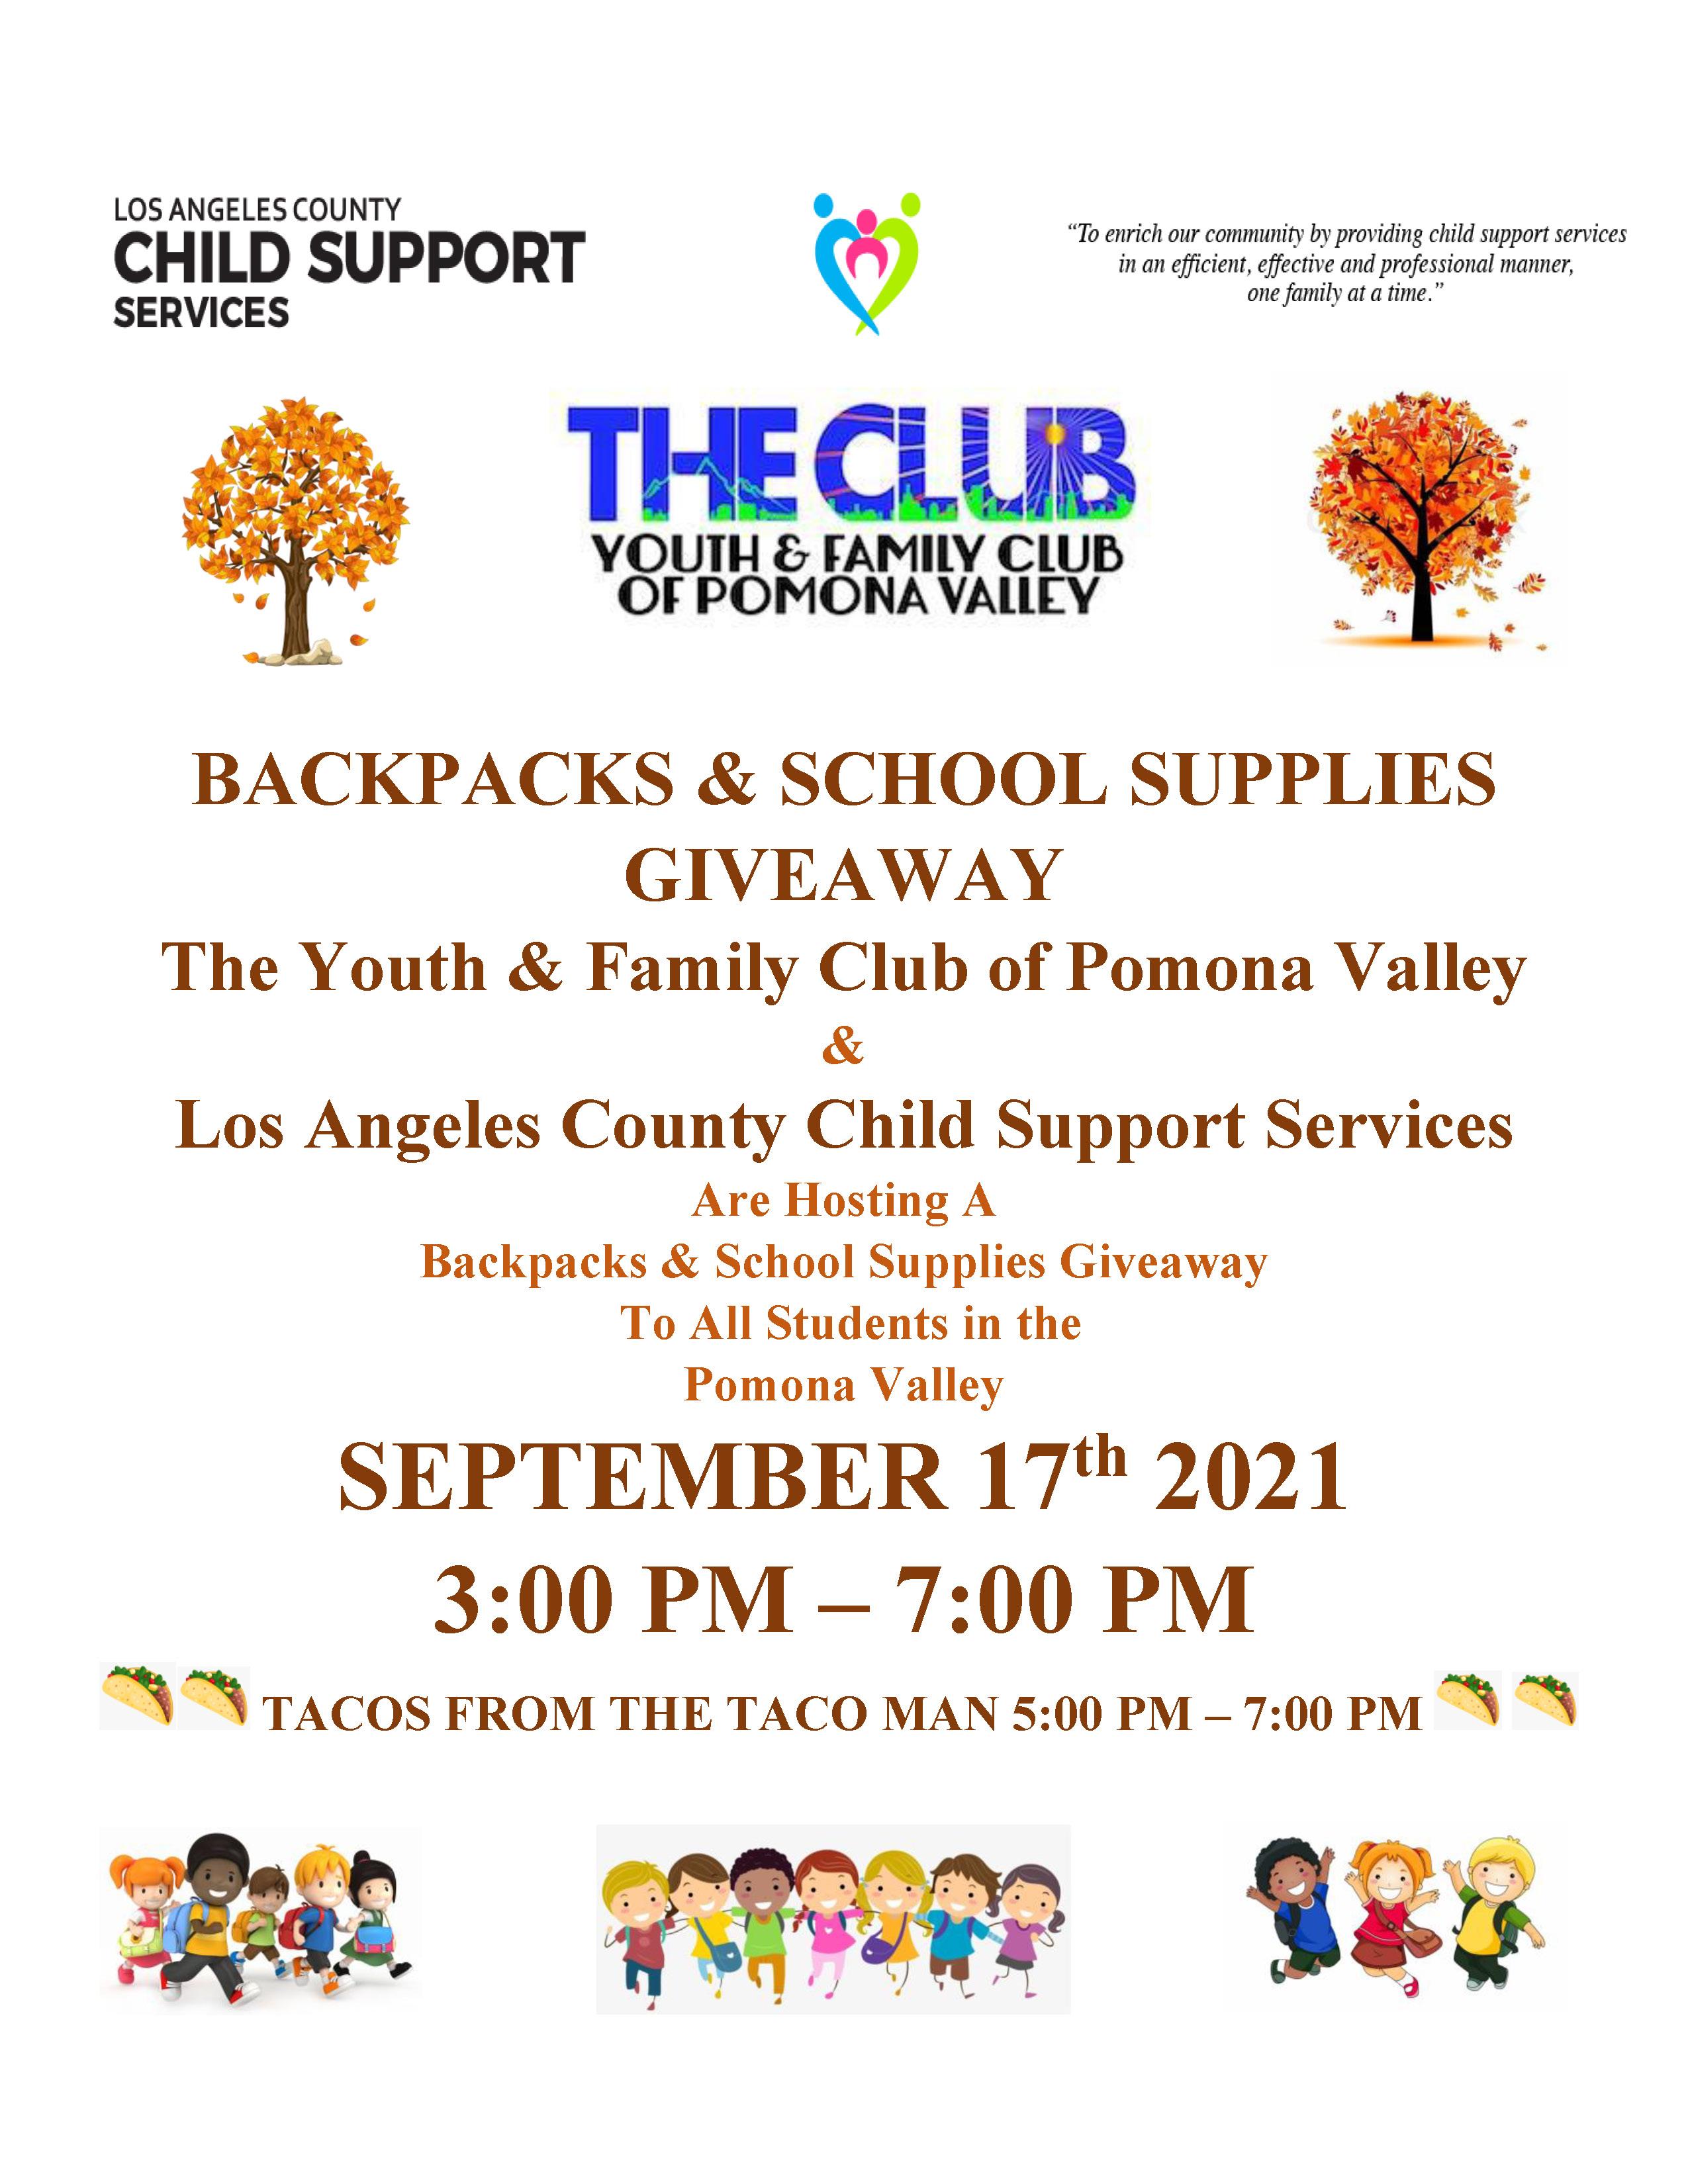 BACKPACKS & SCHOOL SUPPLIES GIVEAWAY The Youth & Family Club of Pomona Valley & Los Angeles County Child Support Services Are Hosting A Backpacks & School Supplies Giveaway To All Students in the Pomona Valley SEPTEMBER 17th 2021 3:00 PM – 7:00 PM TACOS FROM THE TACO MAN 5:00 PM – 7:00 PM